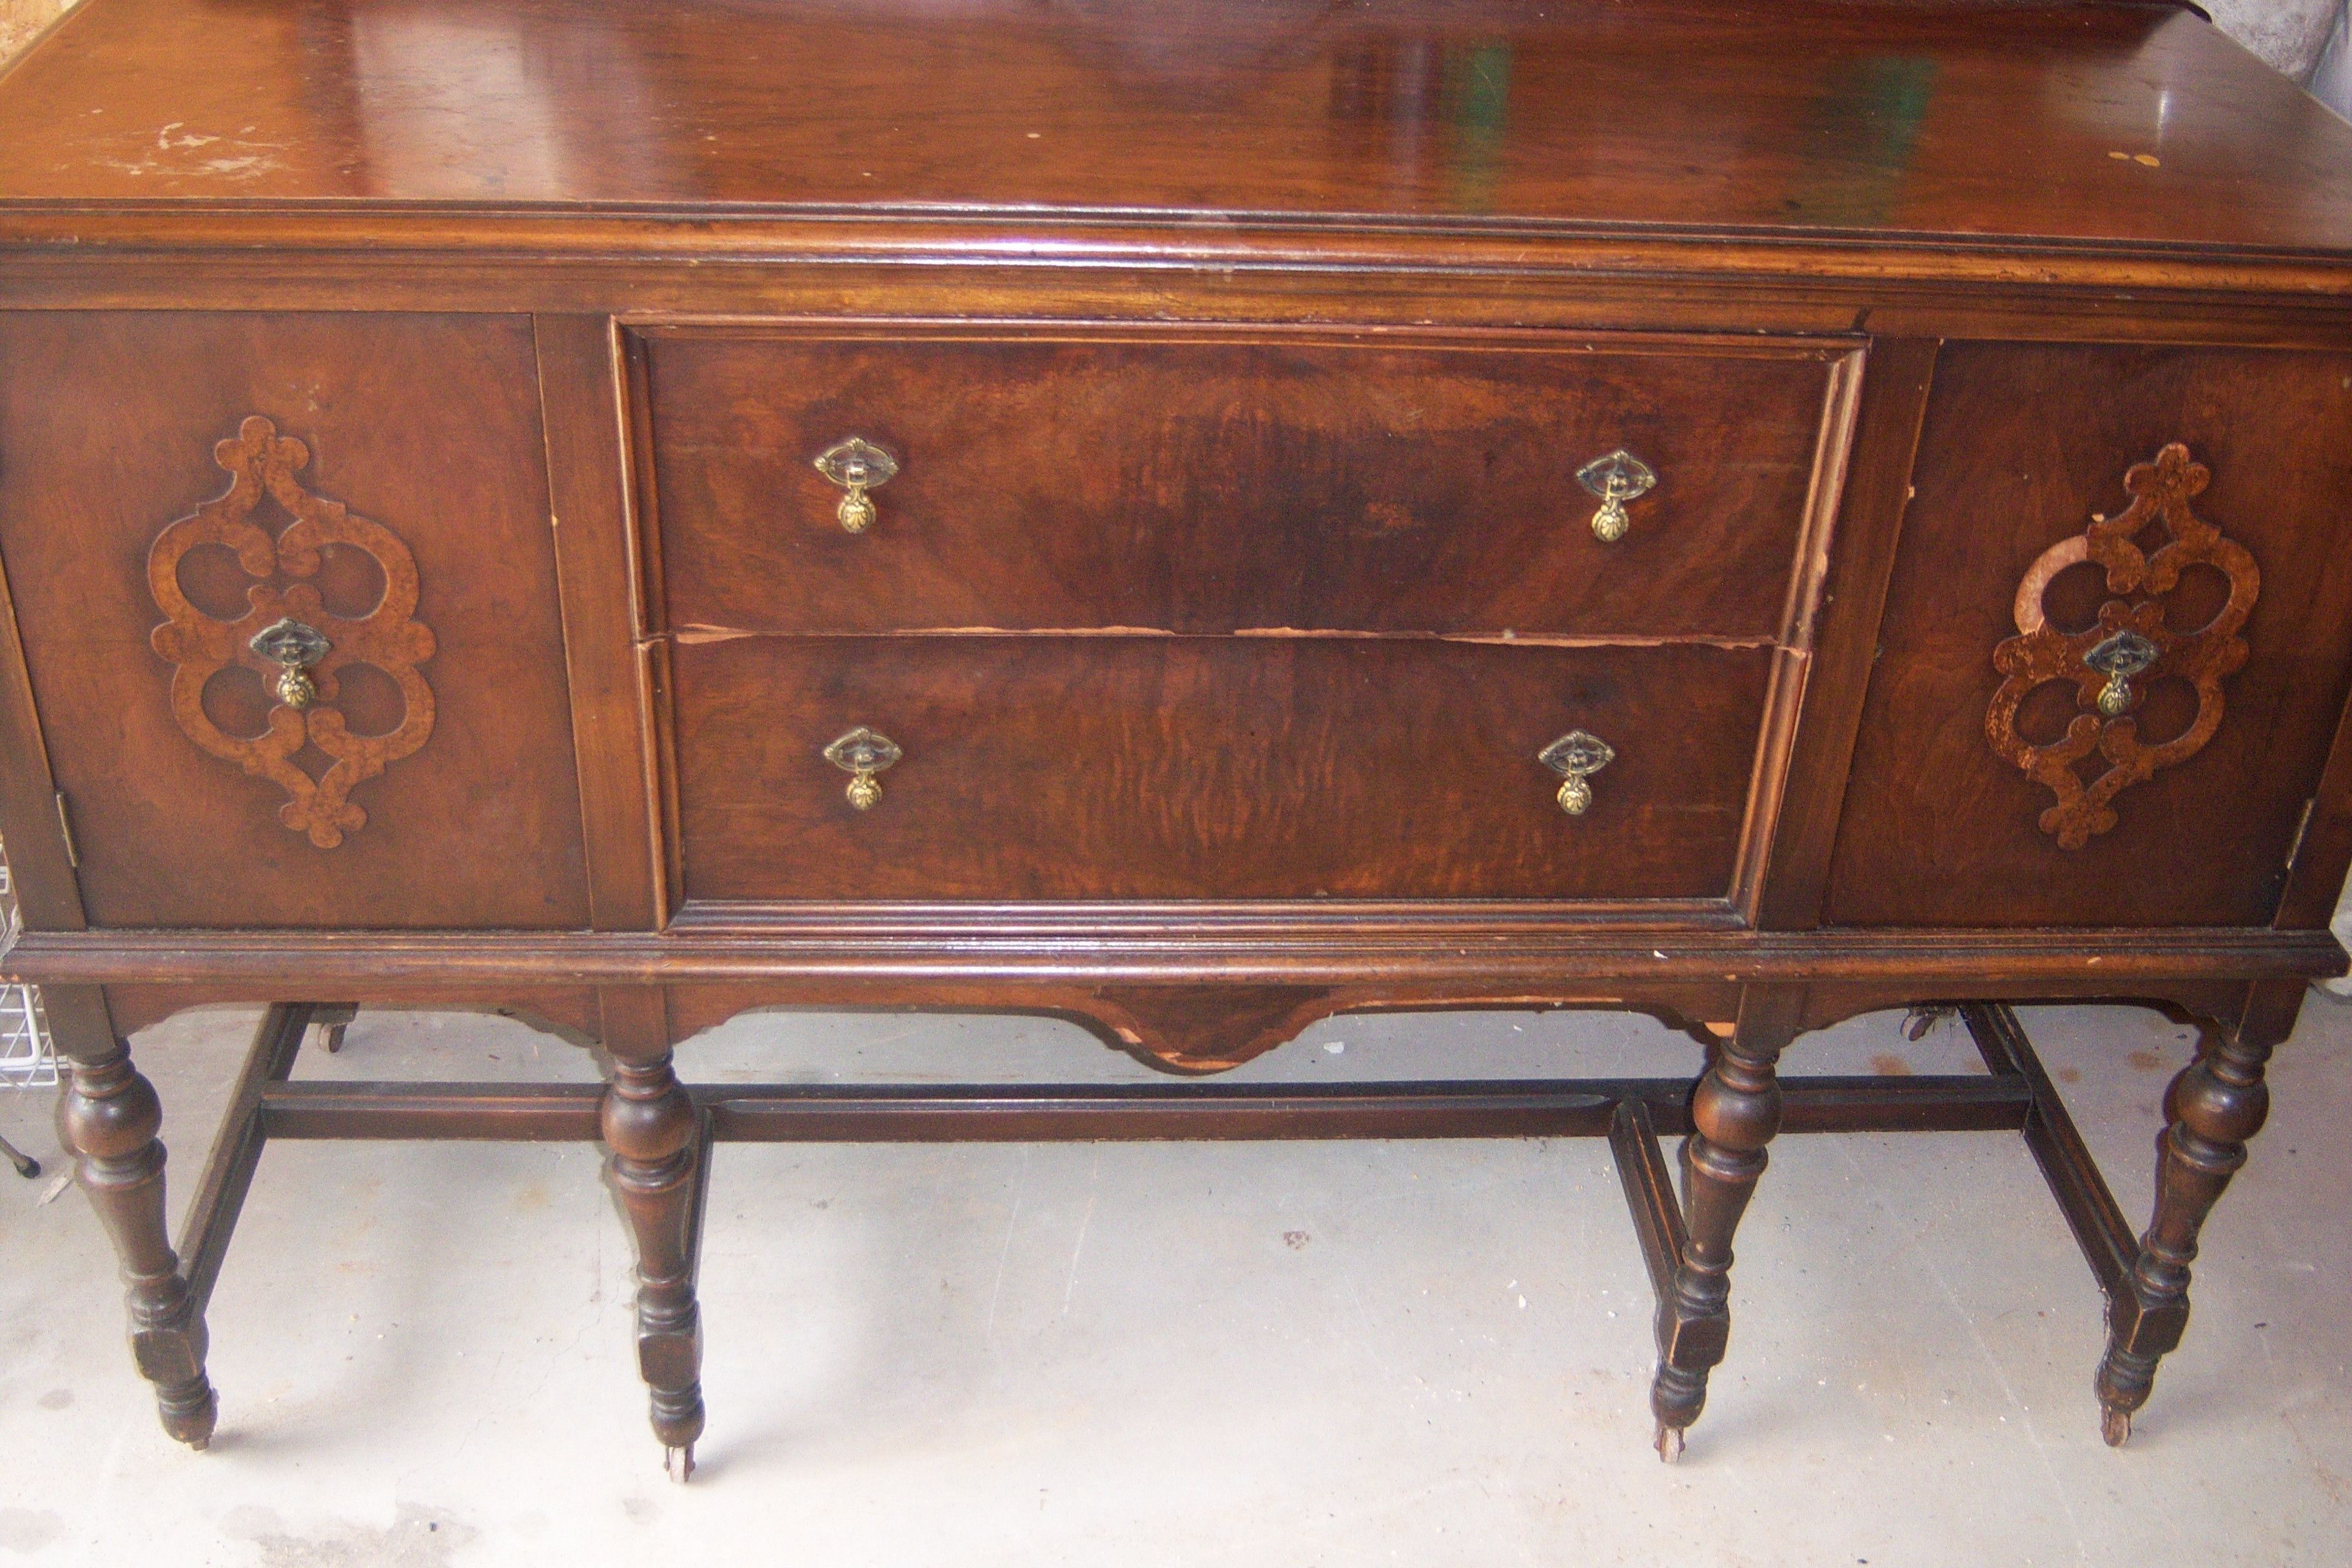 Antiques For Sale | Antique Sideboard Buffet – For Sale | Antiques Pertaining To Vintage Brown Textured Sideboards (View 6 of 30)